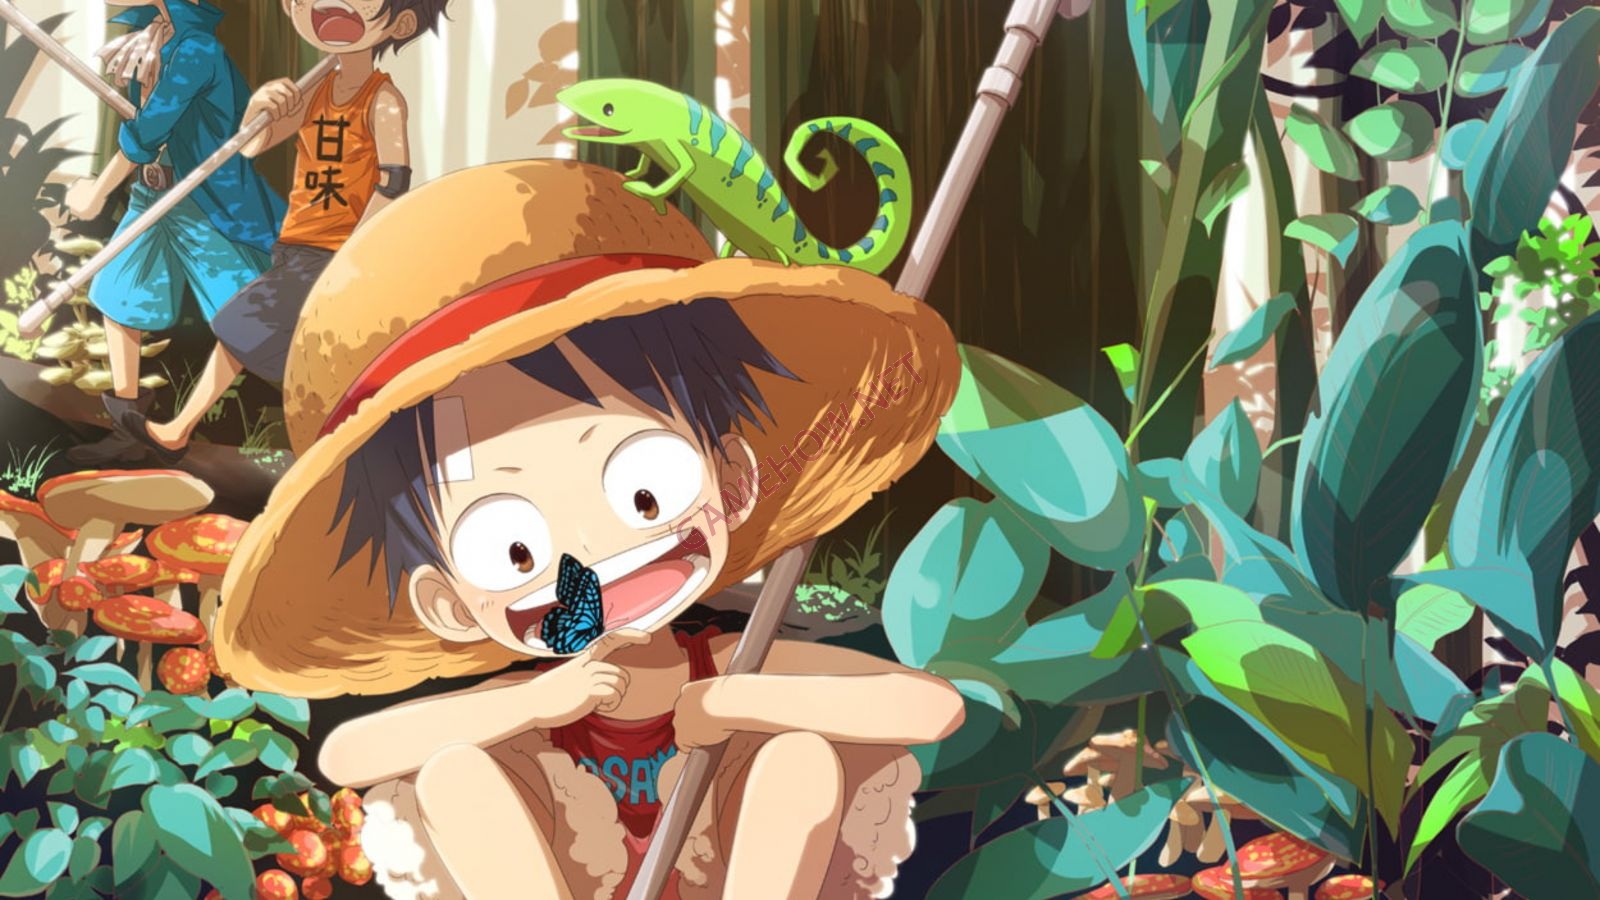 anh luffy chat luong 4k 1 jpg